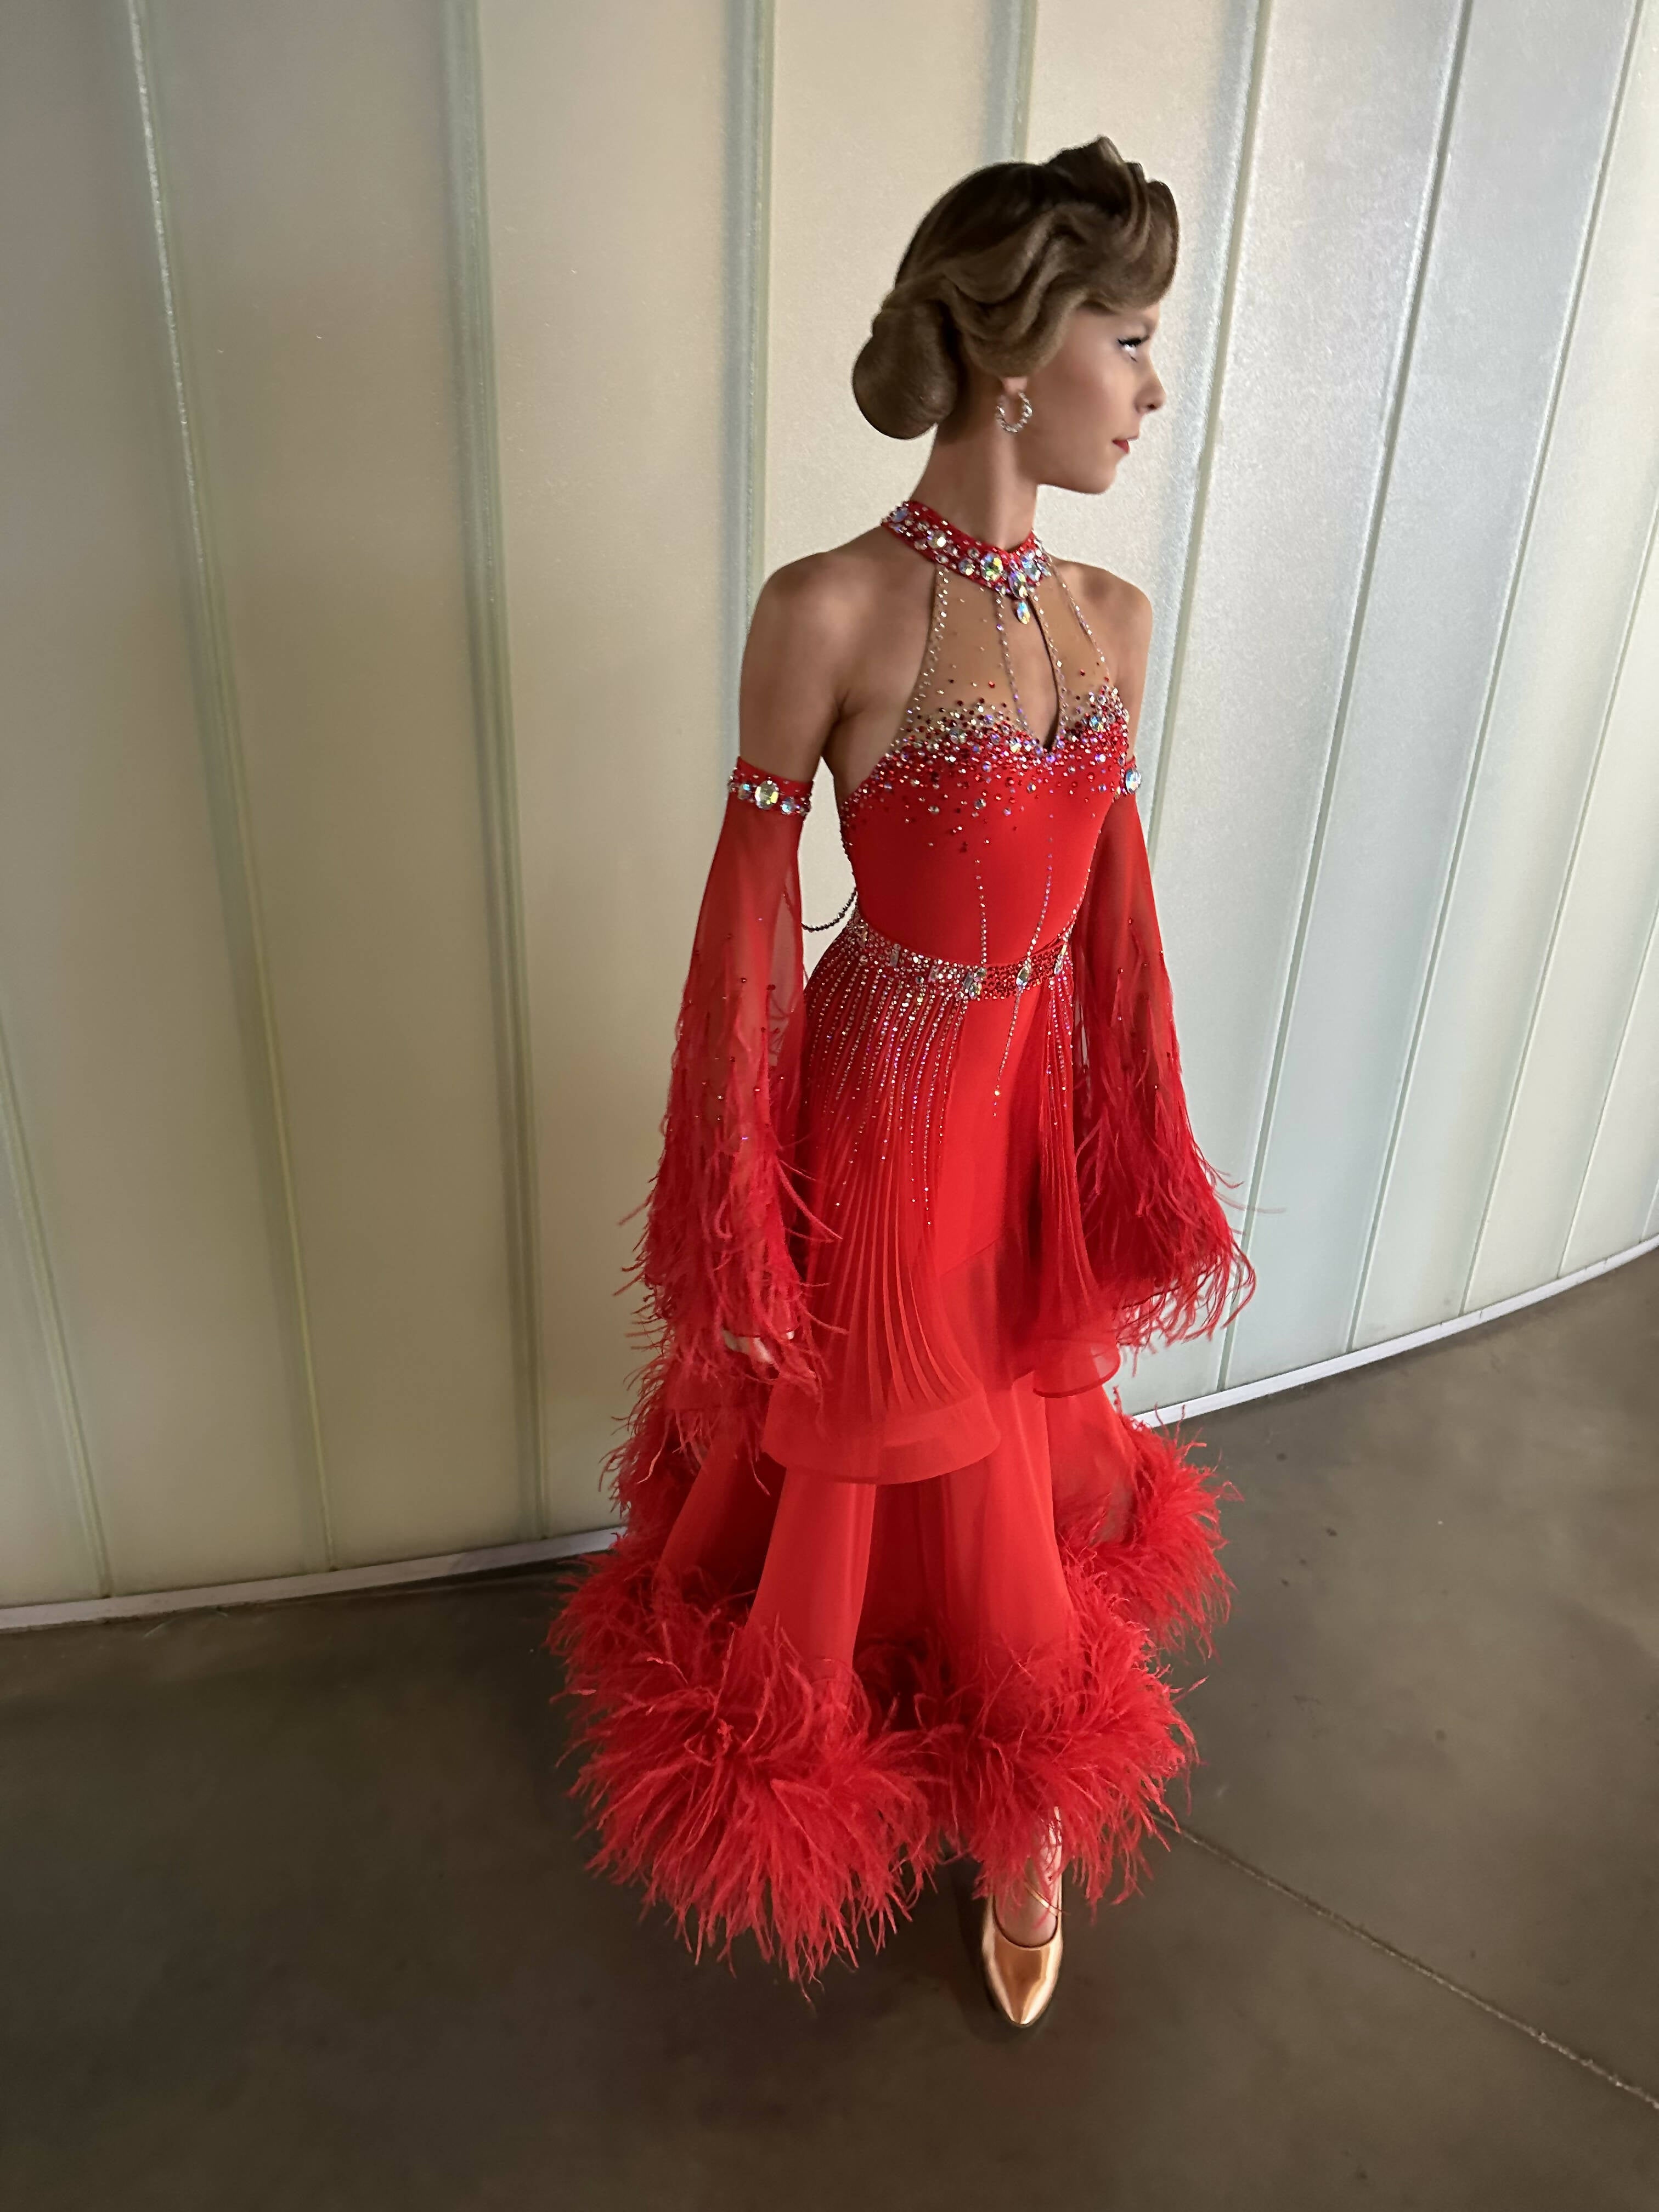 Flame Feathered Dress